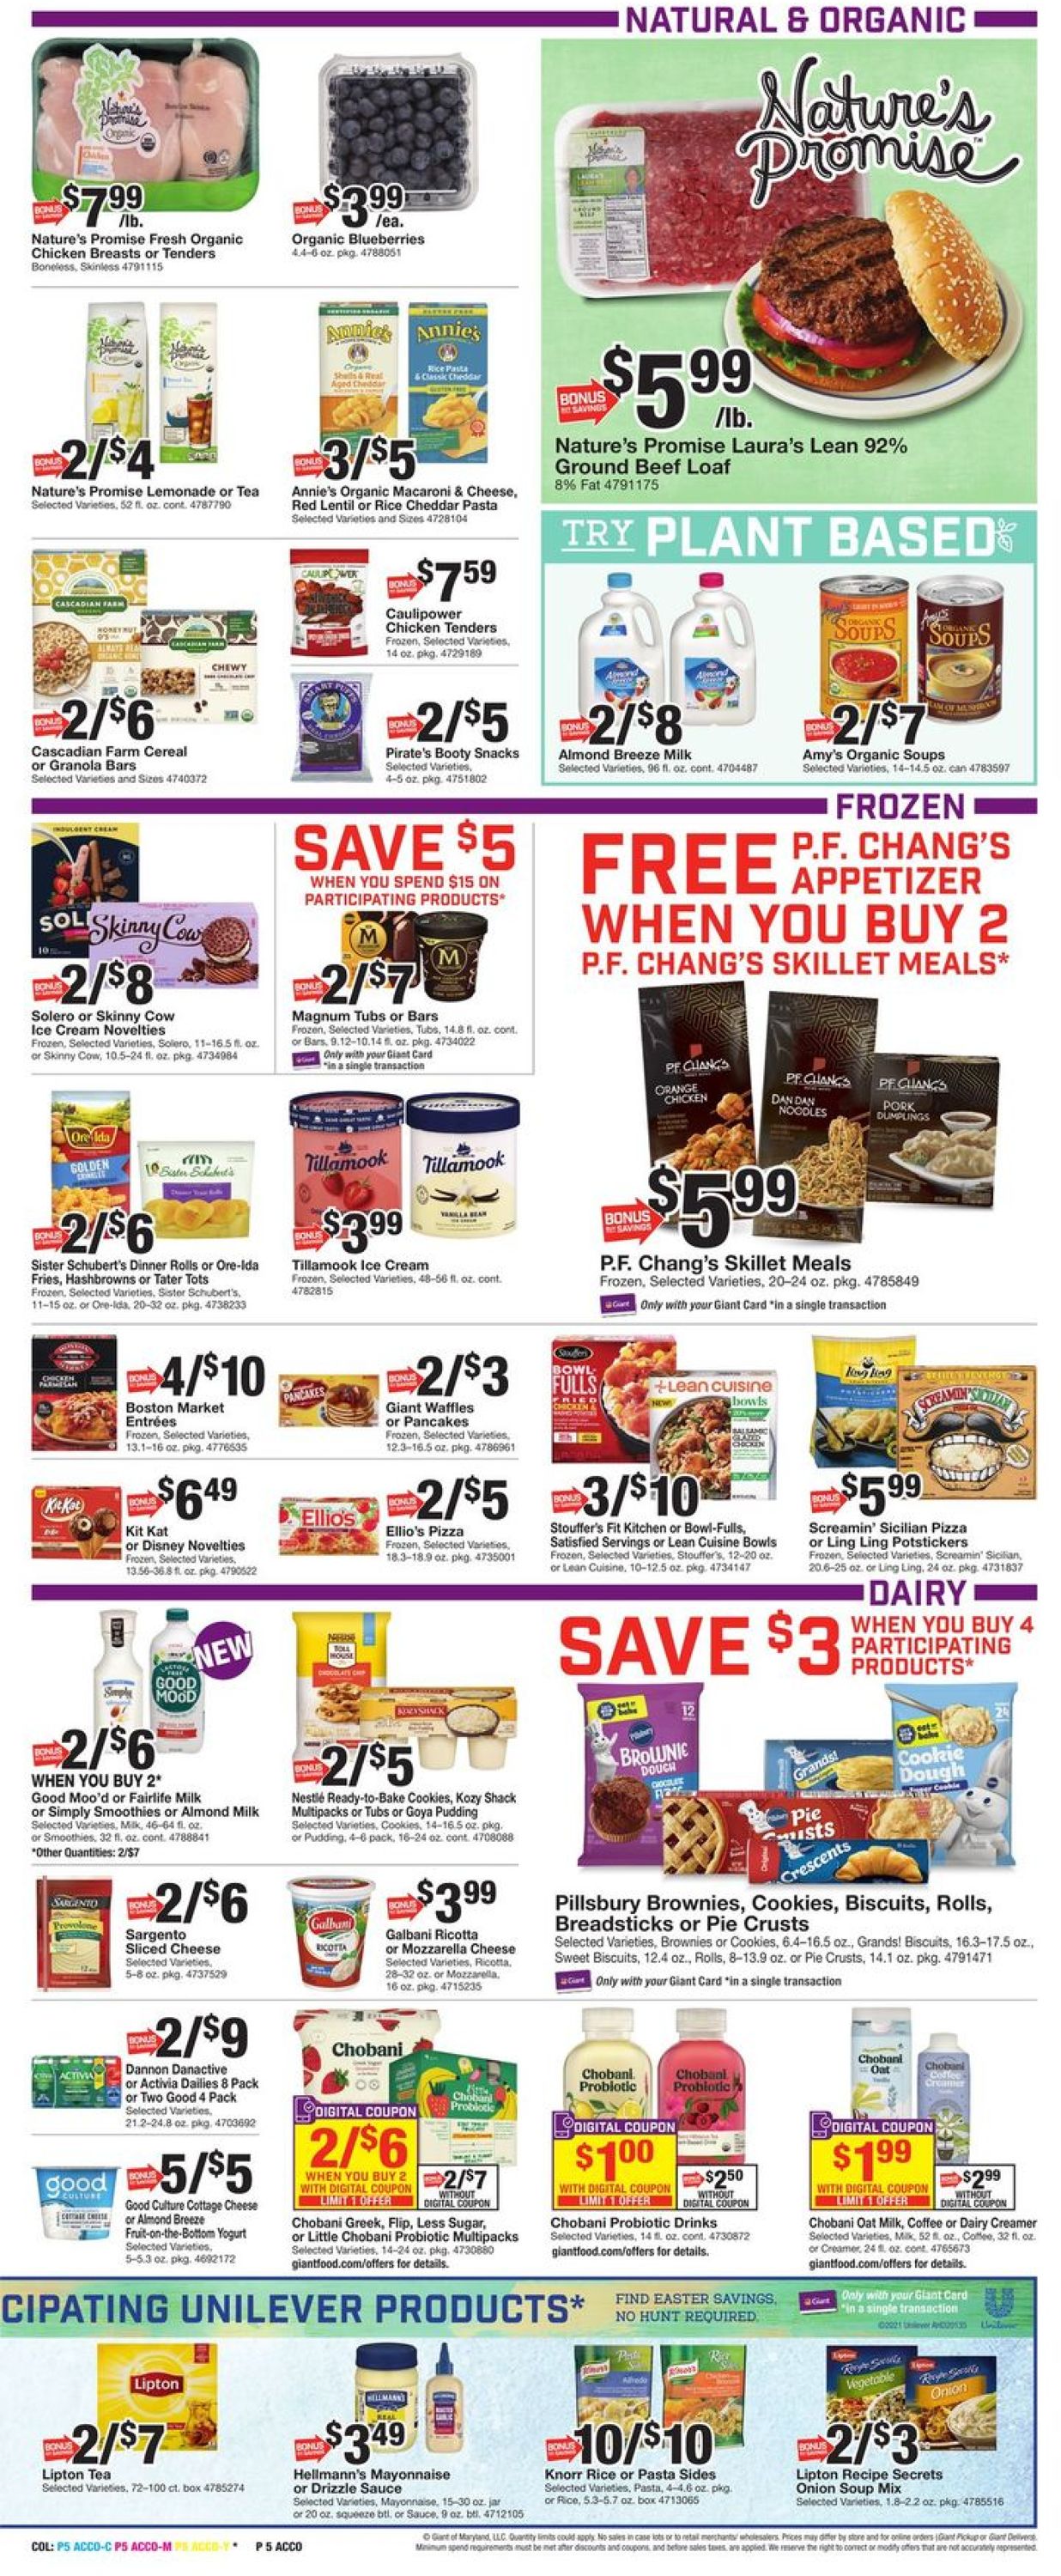 Giant Food - Easter 2021 Ad Weekly Ad Circular - valid 03/26-04/01/2021 (Page 7)